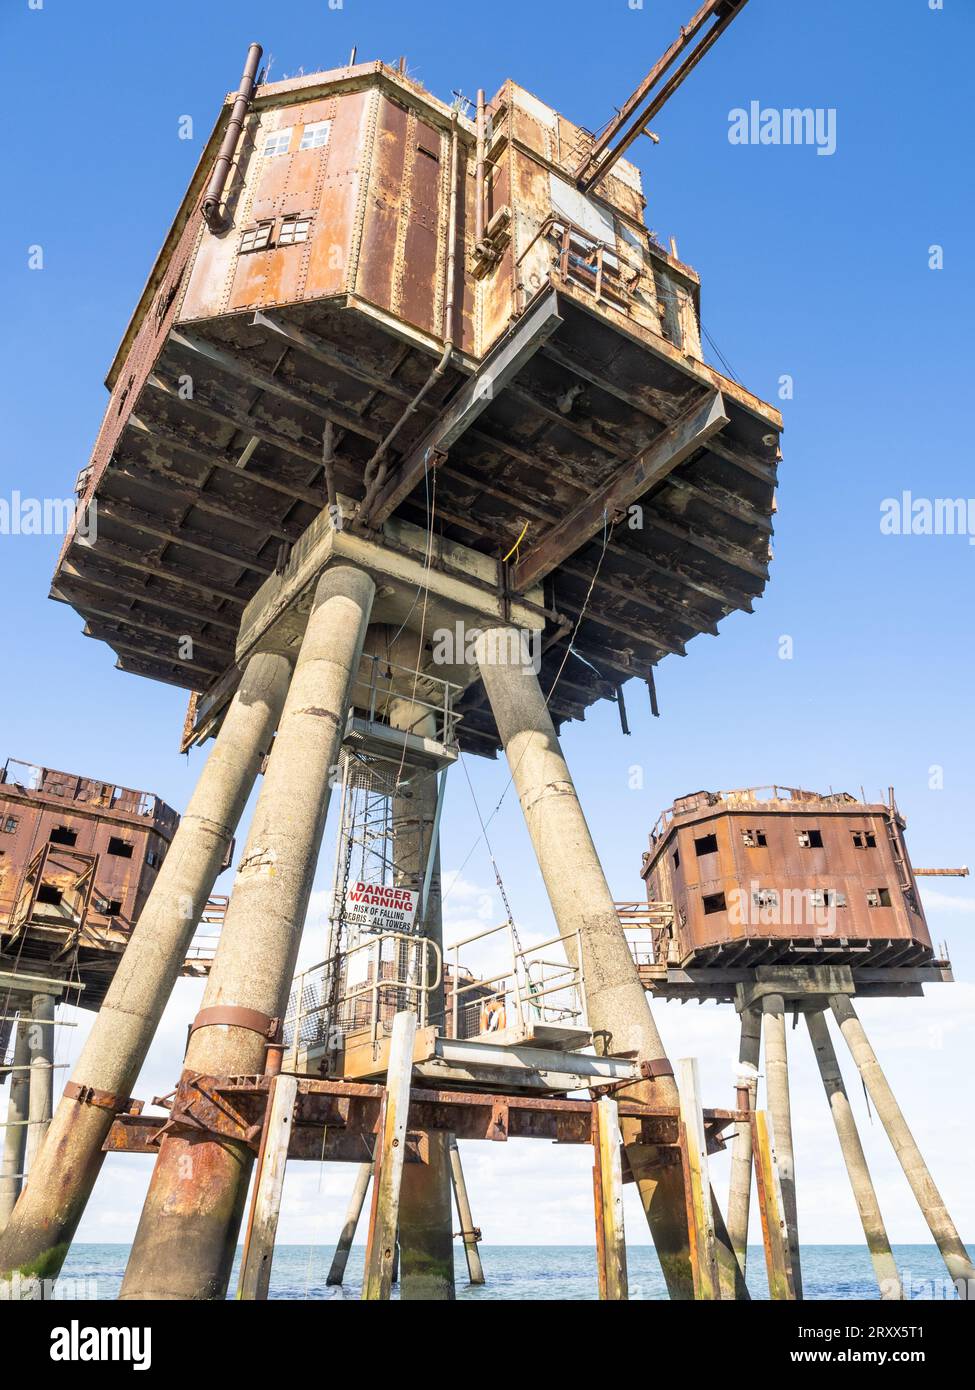 Maunsell Sea Forts in the Thames estuary Stock Photo